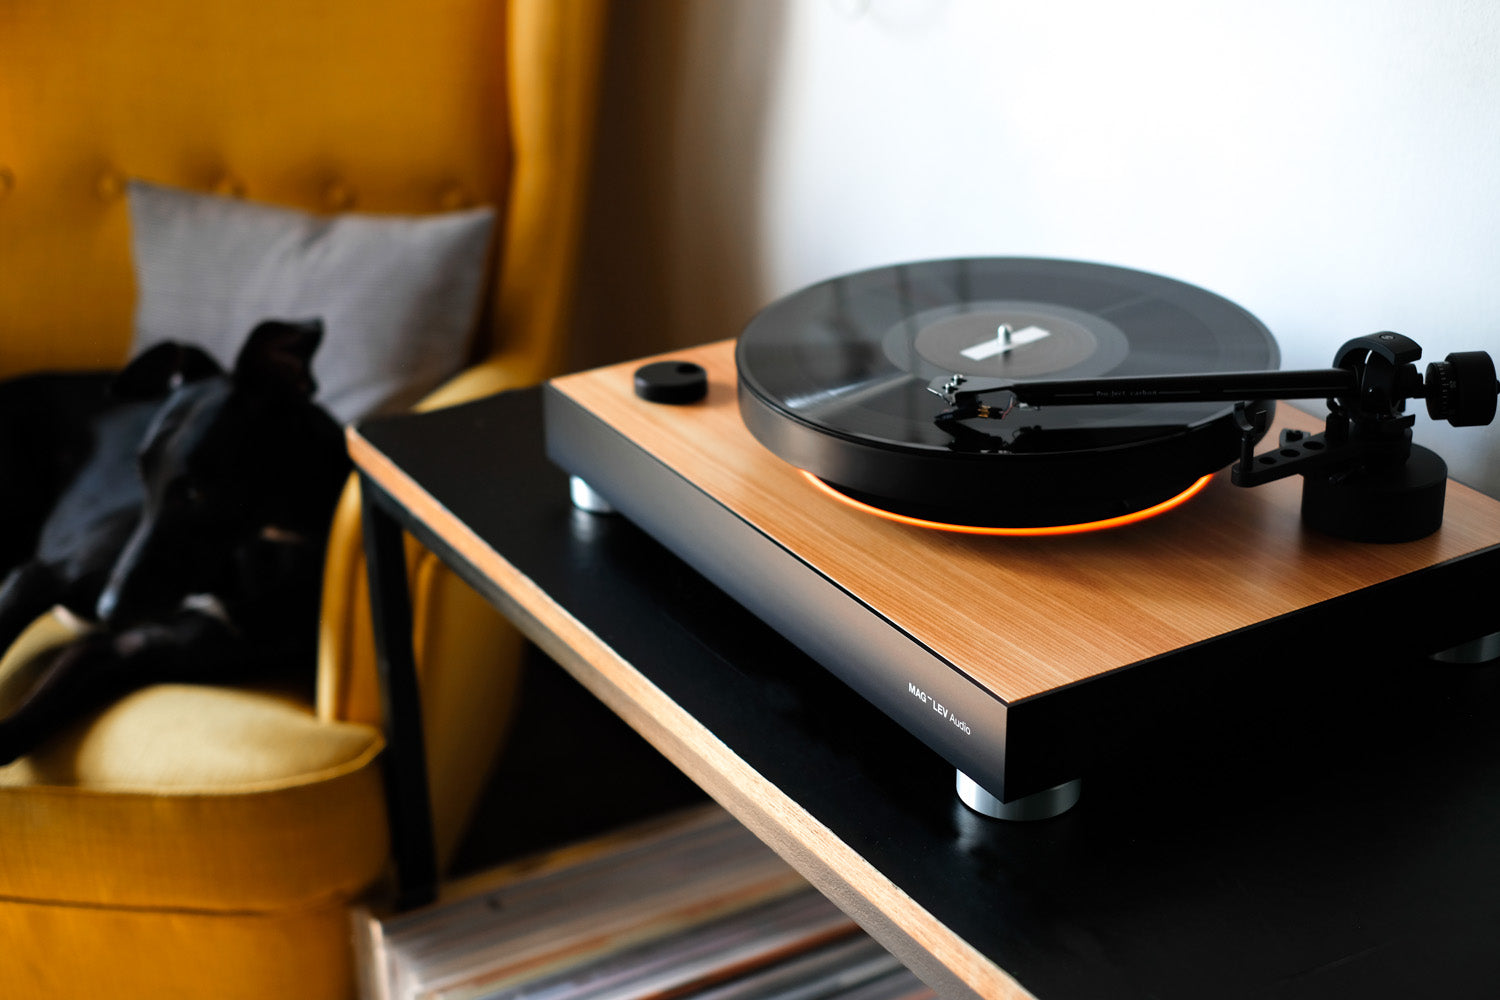 How does the world’s first “levitating turntable” actually work?